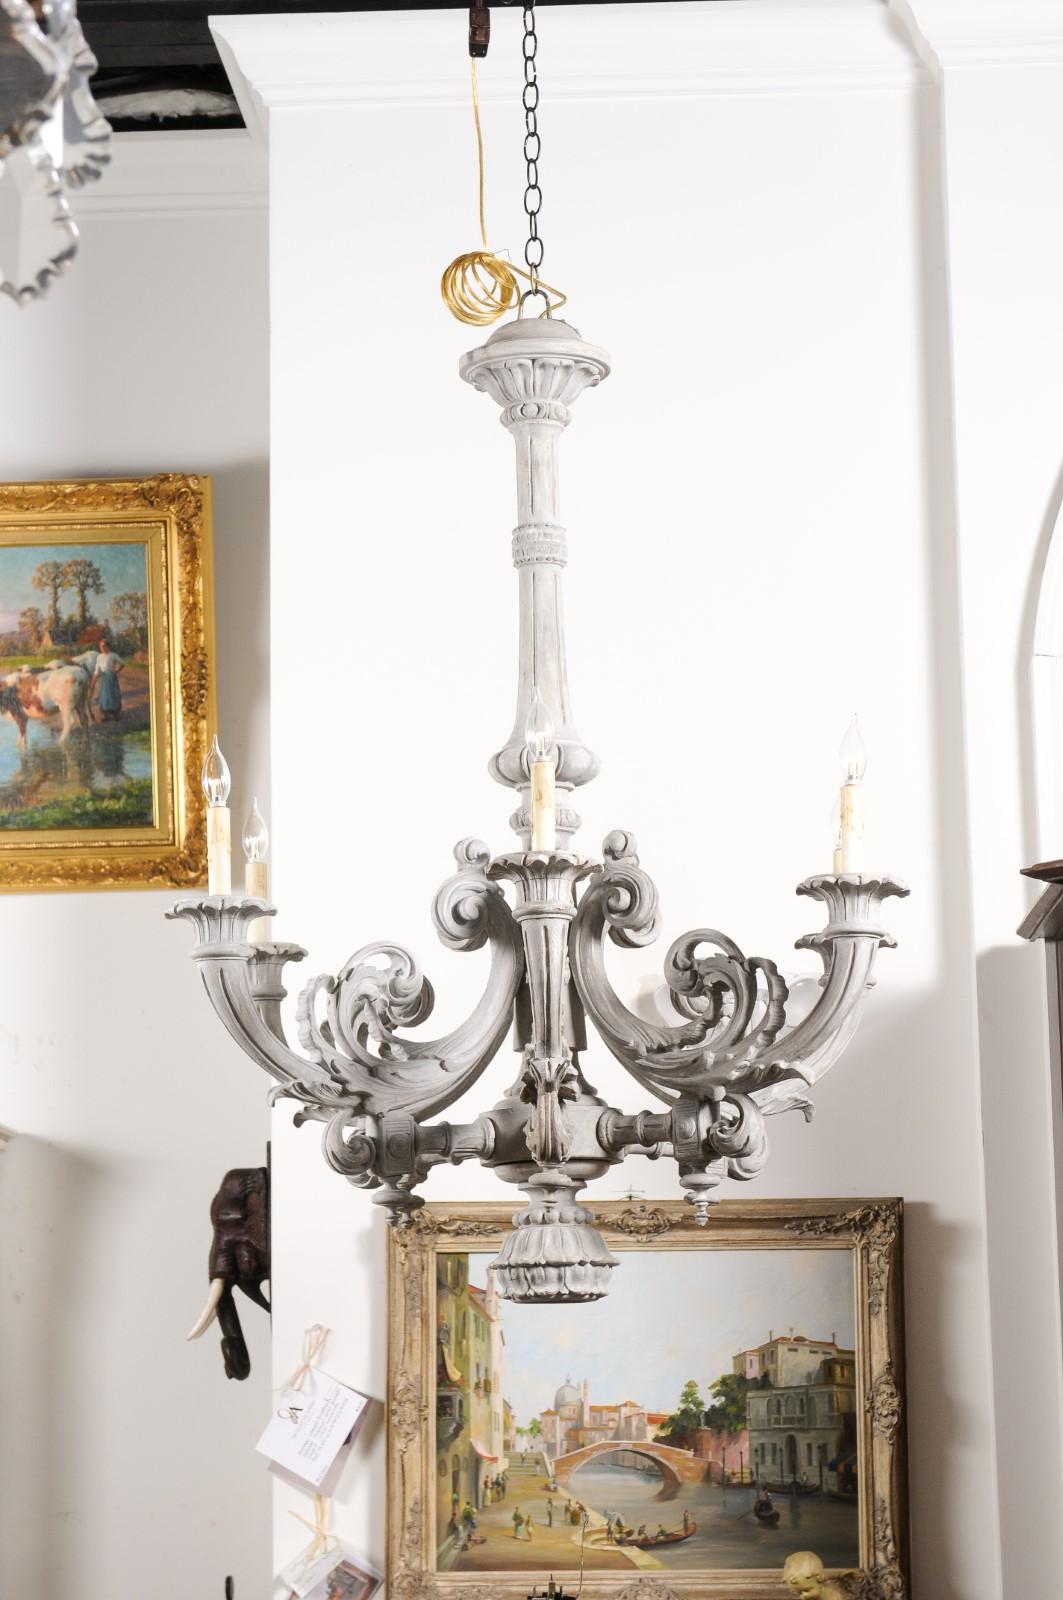 French Turn of the Century Painted Six-Light Chandelier with Scrolling Arms In Good Condition For Sale In Atlanta, GA